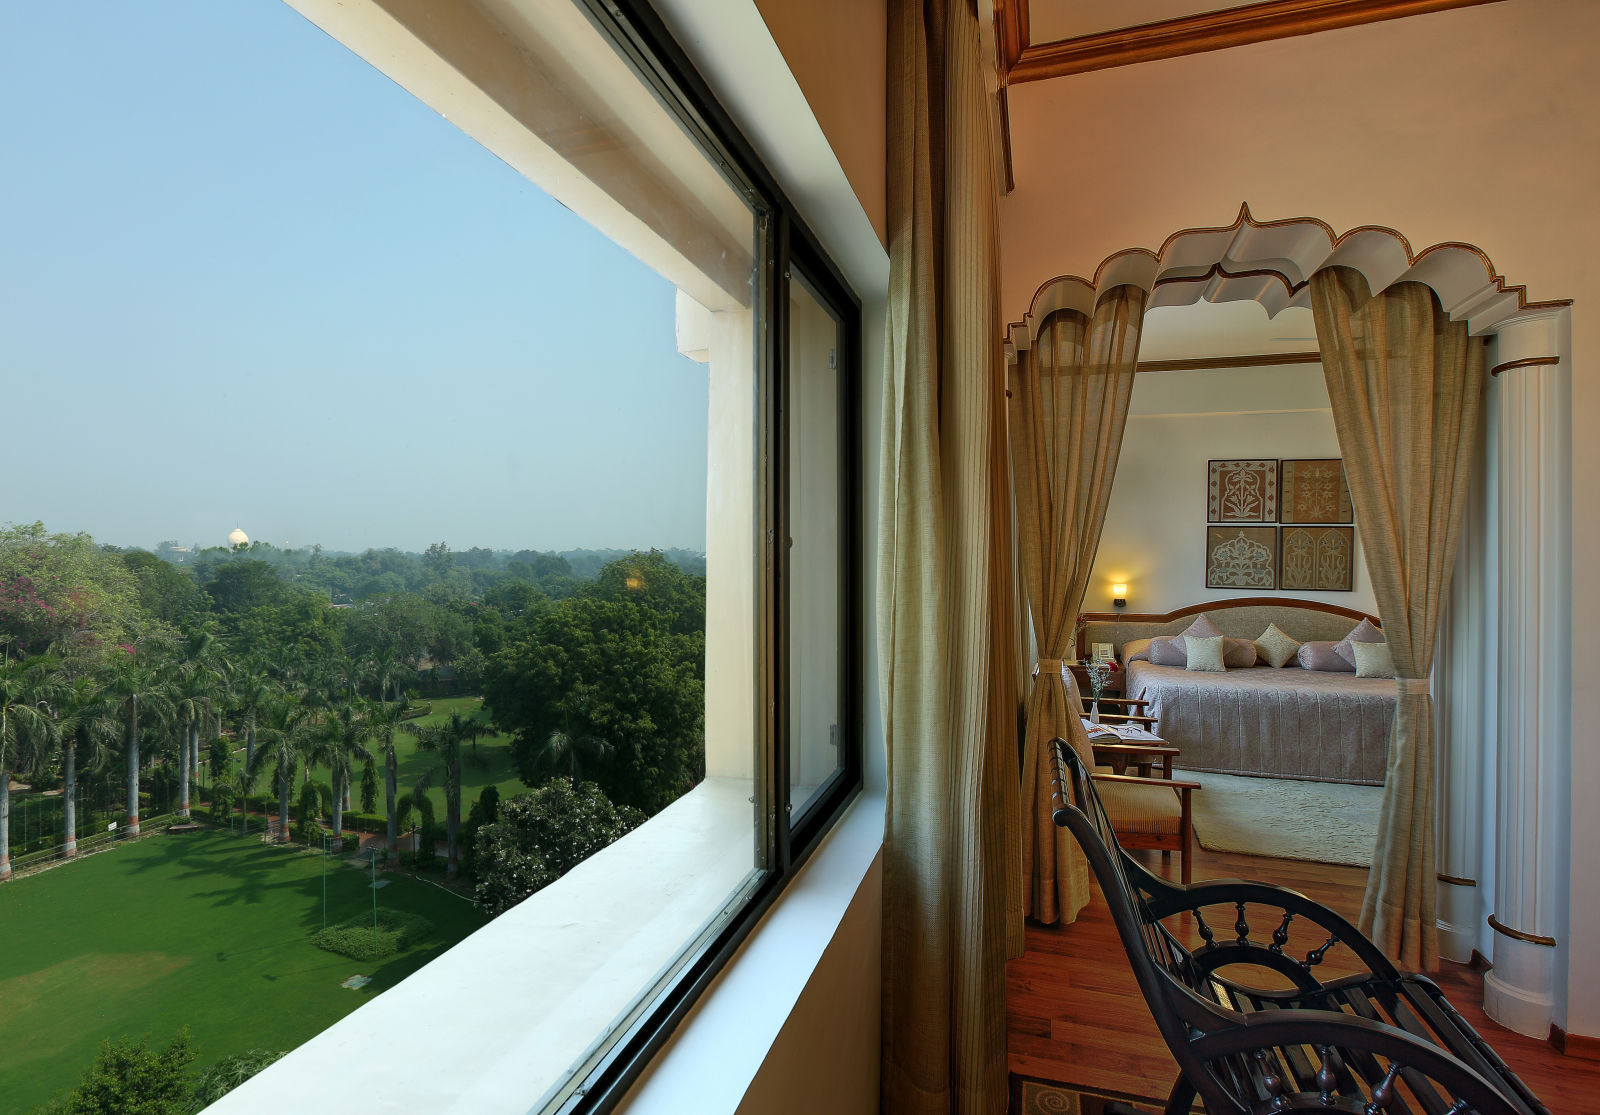 The Mumtaz Suite with garden views